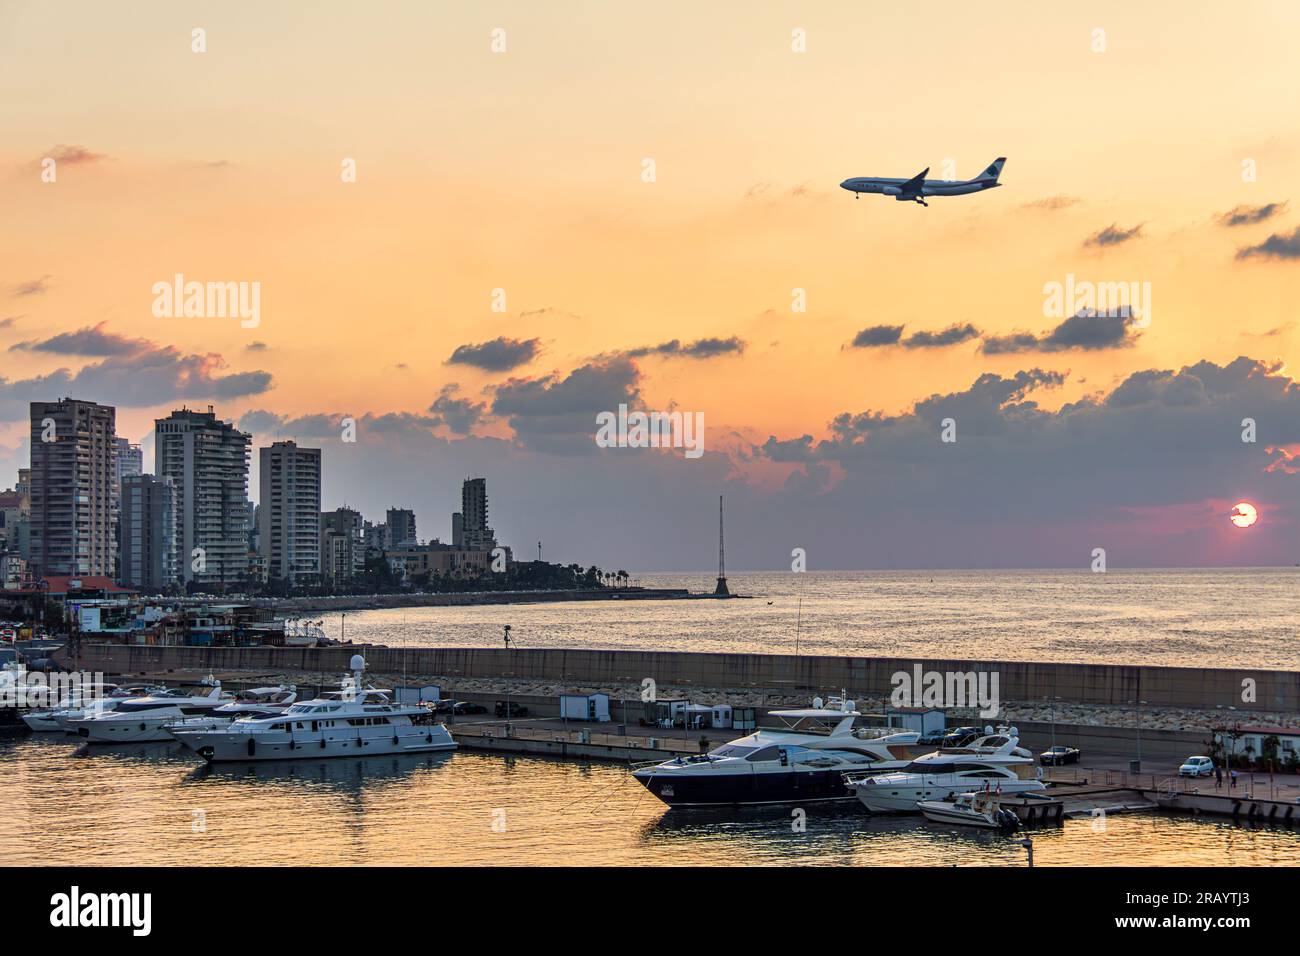 A plane landing over Beirut waterfront skyline during sunset Stock Photo